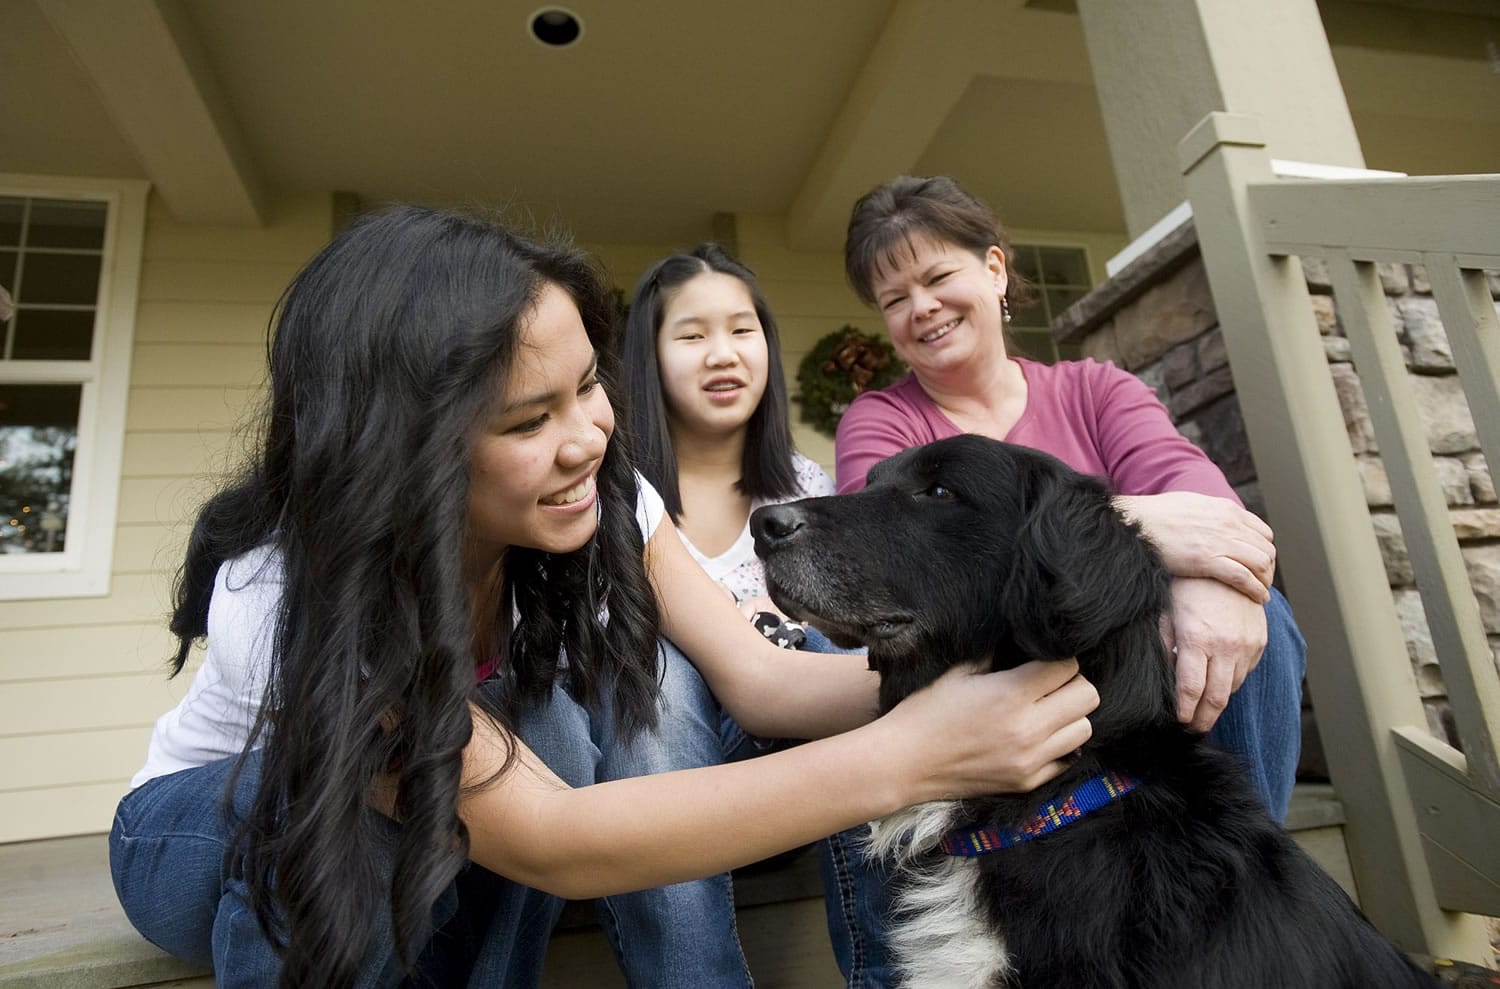 The Hickey family, from left, Sydney, 16, Olivia, 14, and Belinda, recently adopted Bella, a border collie mix that belonged to Steven Stanbary, who killed his wife and twin sister and then set fire to the house they shared in Washougal. Stanbary also died. Bella and two other dogs and a cat survived the fire and shootings.